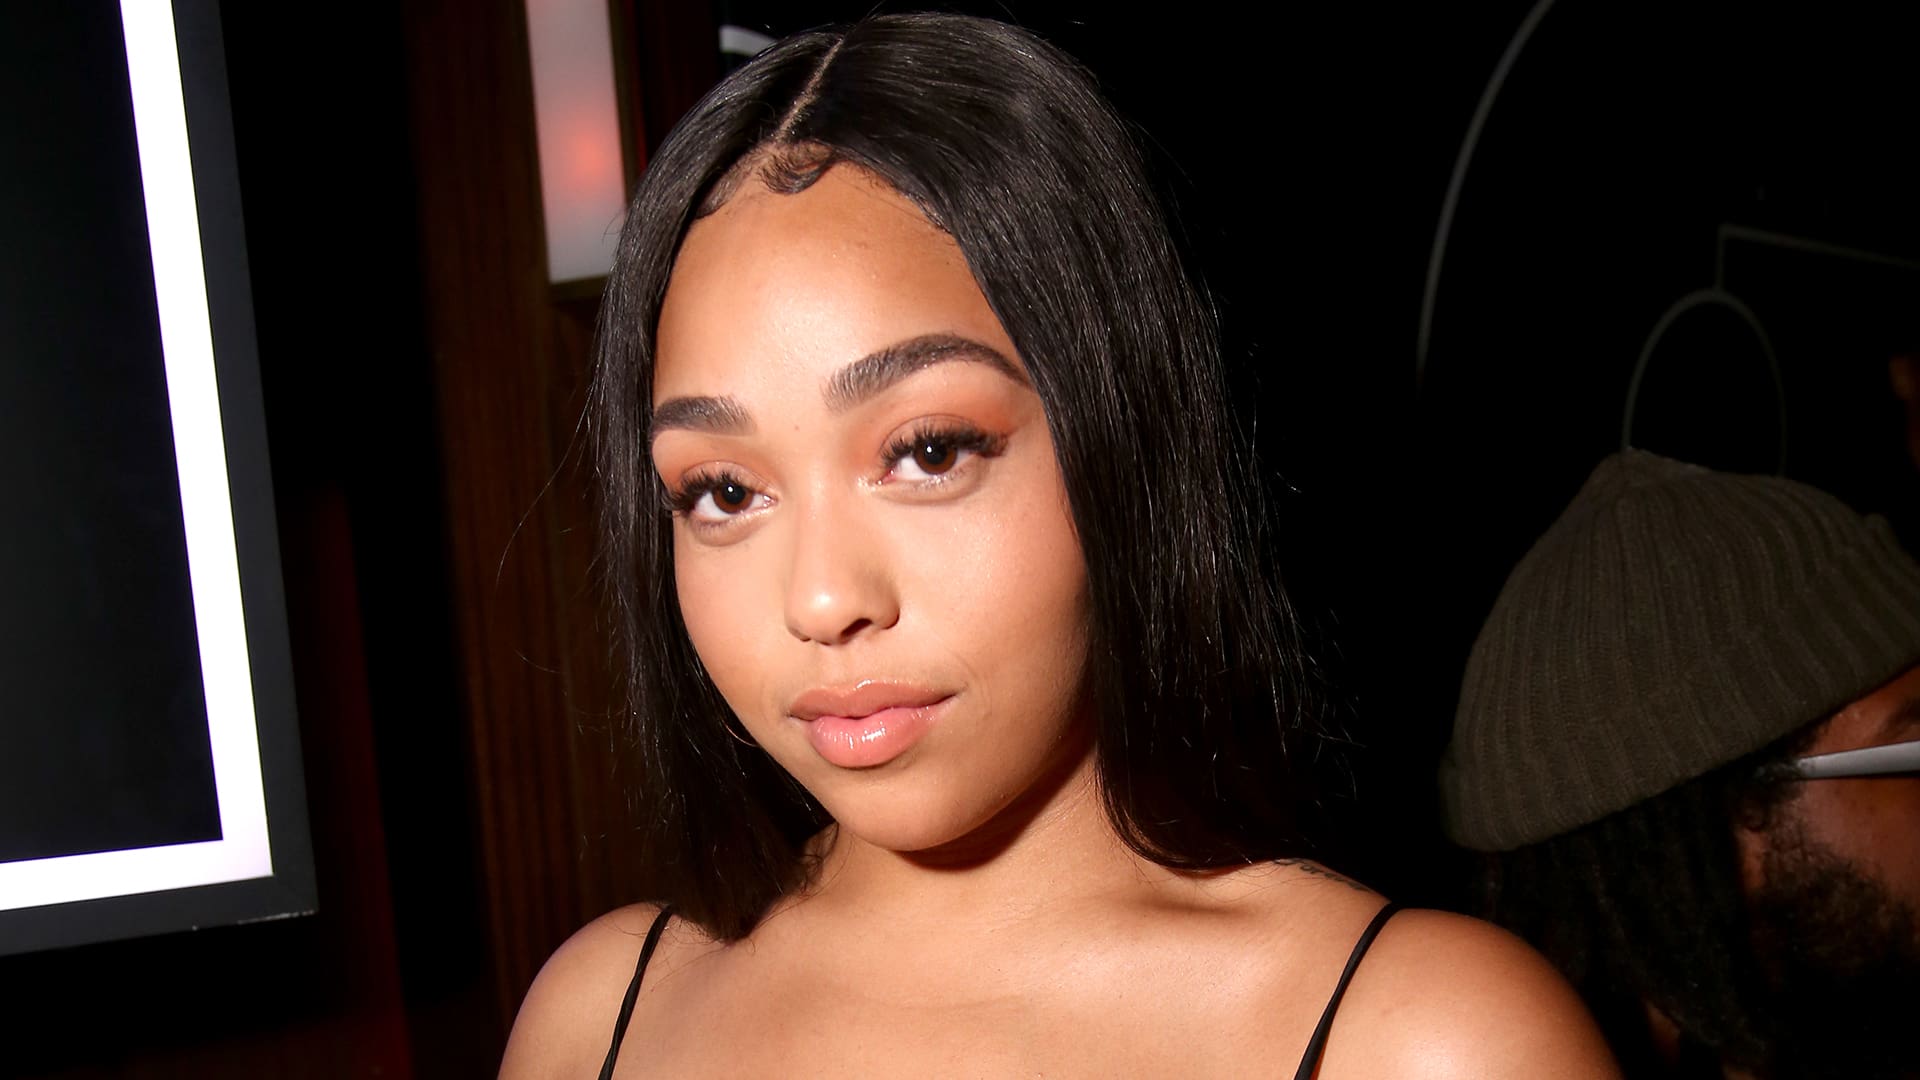 Jordyn Woods Puts Her Assets On Display While Being Flooded With New Business Deals